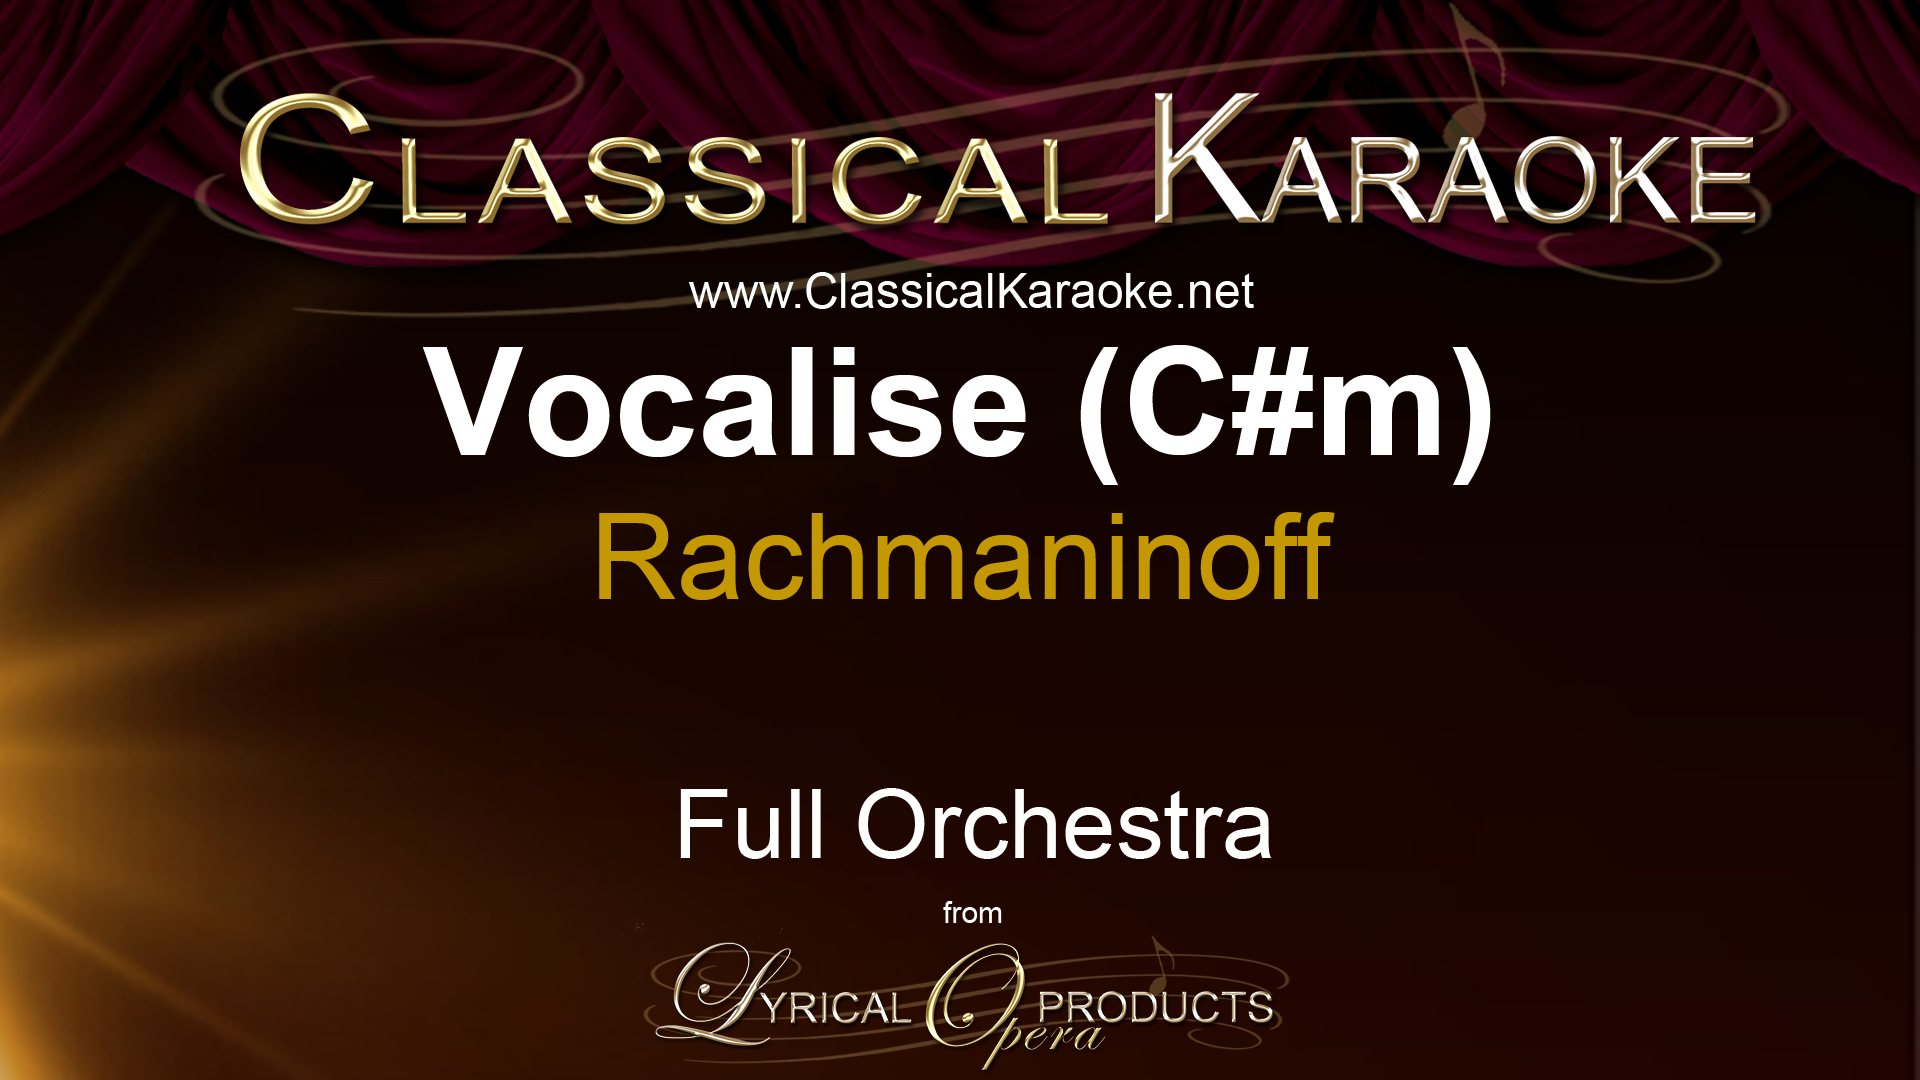 Vocalise (C#m), by Rachmaninoff, Full Orchestral Accompaniment (karaoke) track